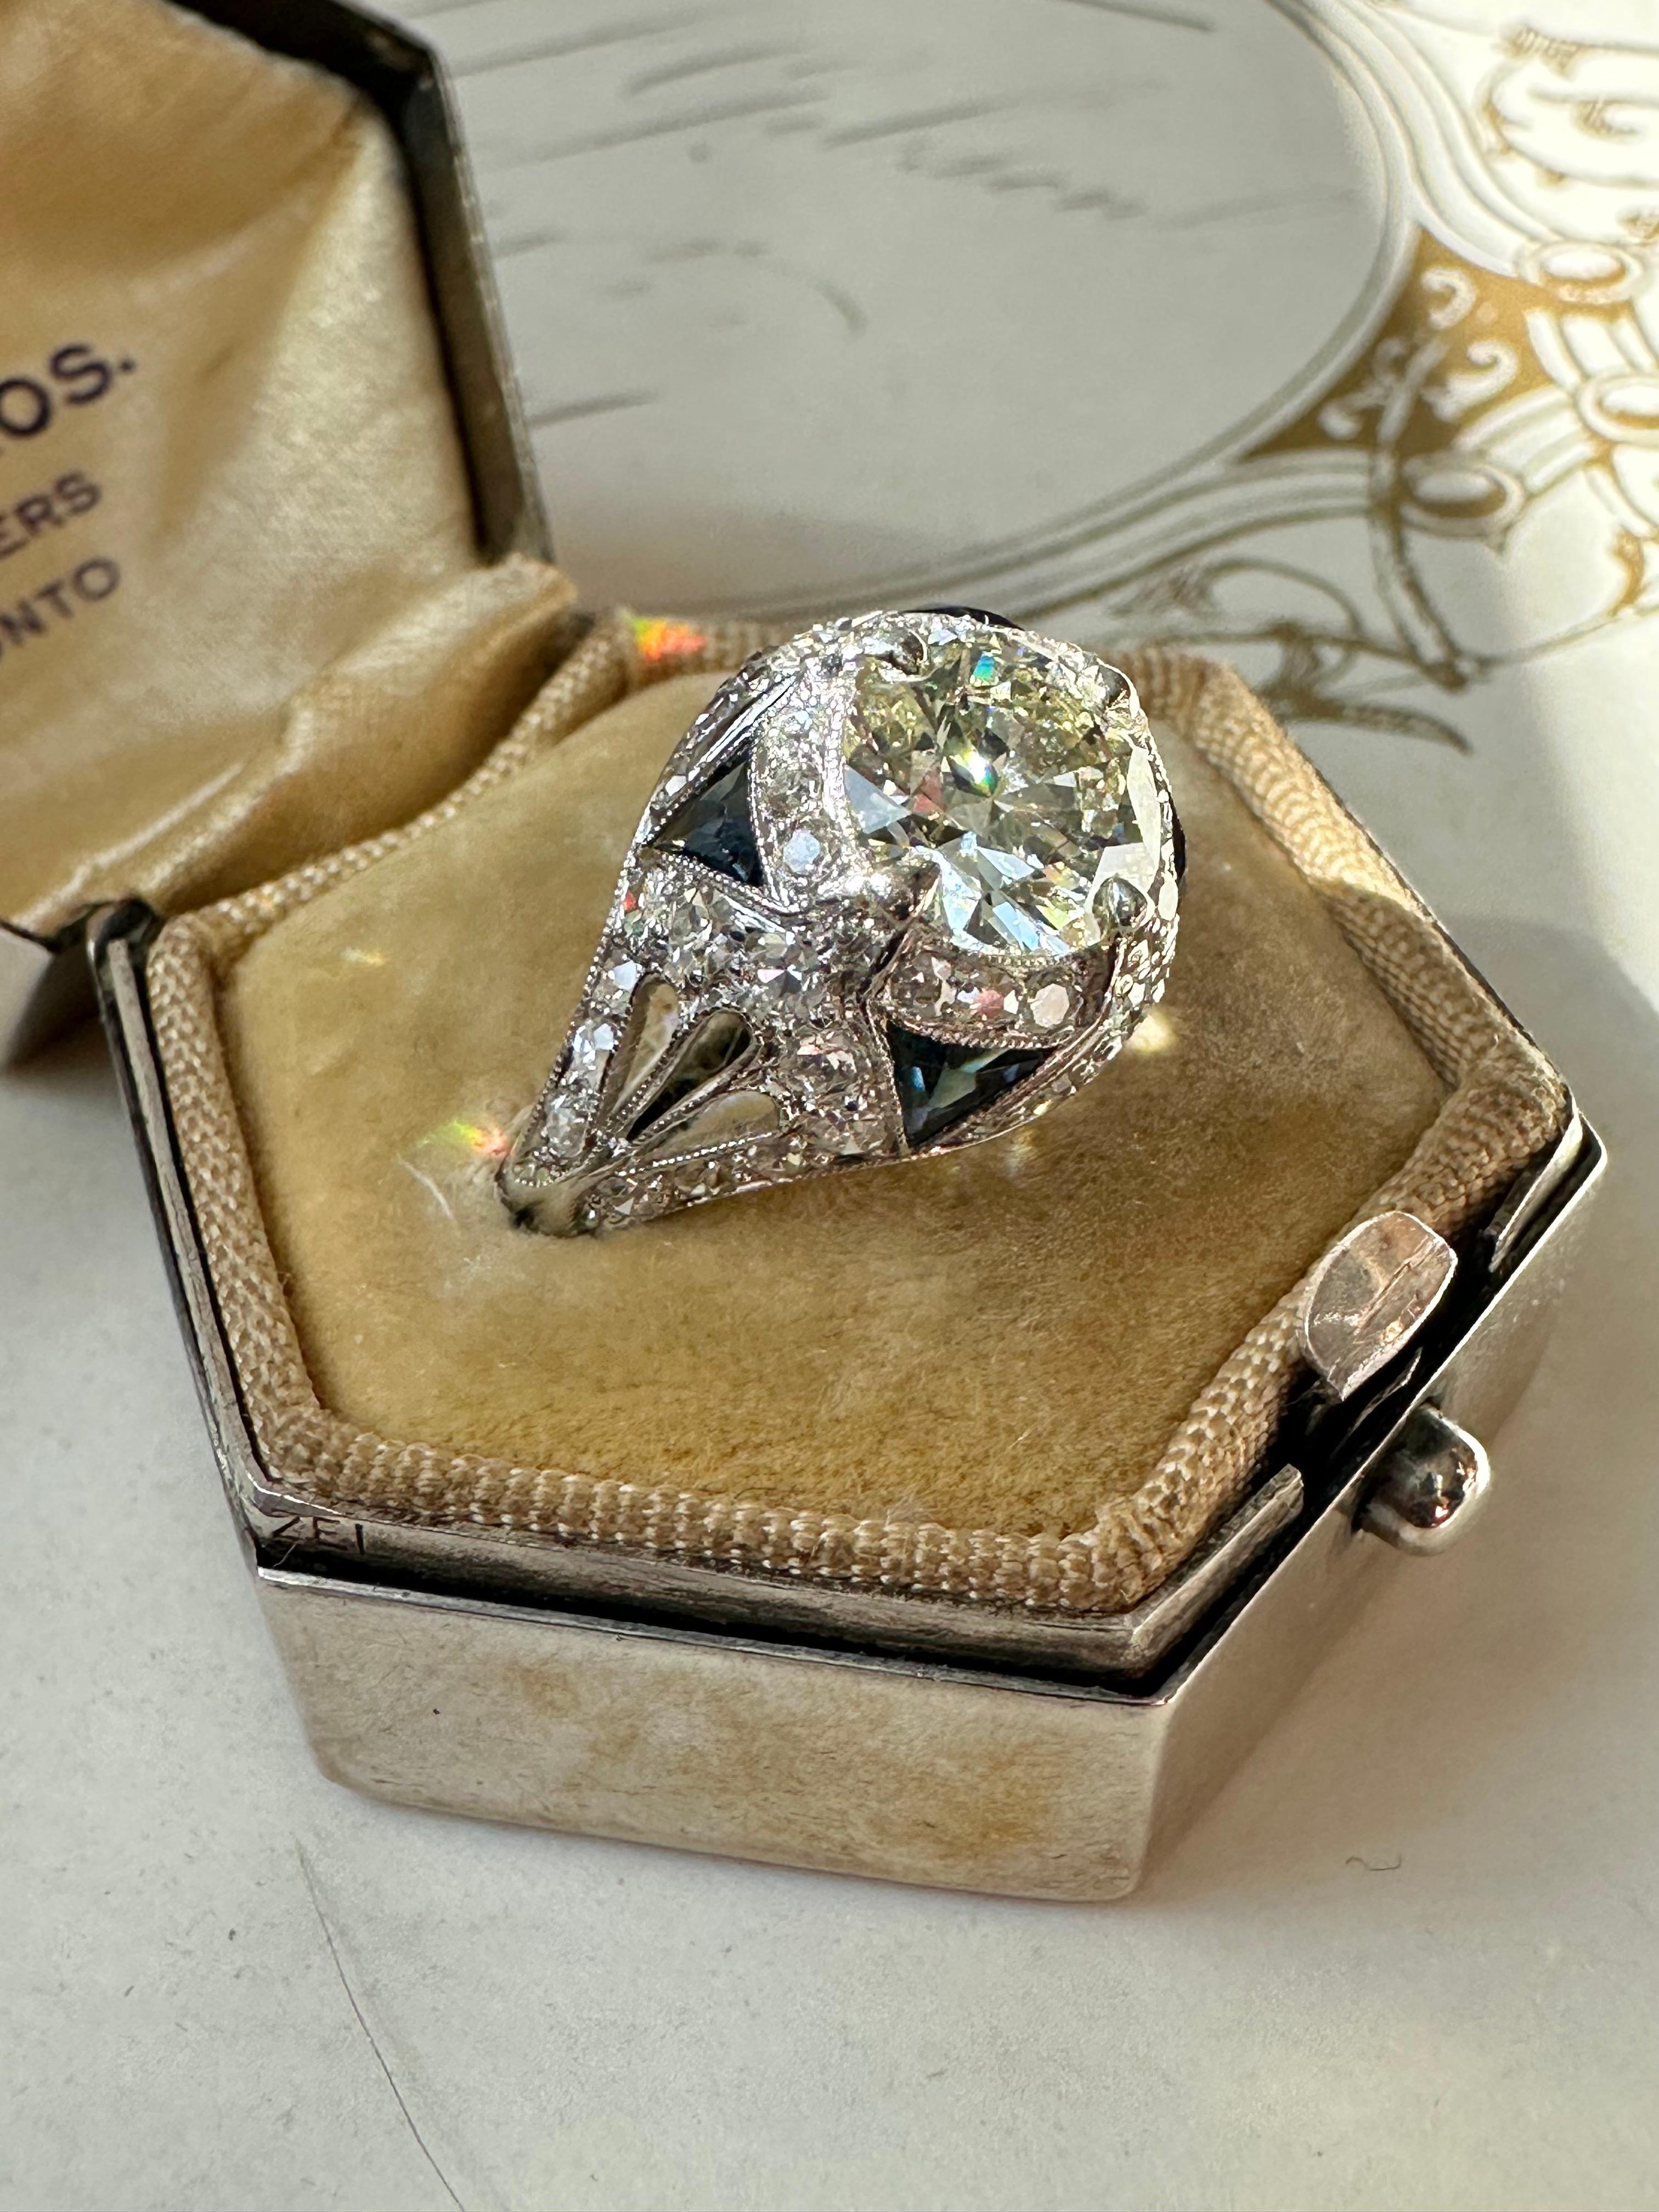 This spectacular Art Deco ring boasts a lively 1.53 carat transitional-cut diamond wrapped in a halo of glittering single-cut diamonds and crowned by four deep blue synthetic calibre sapphires. Expertly hand fabricated in platinum, the shoulders are